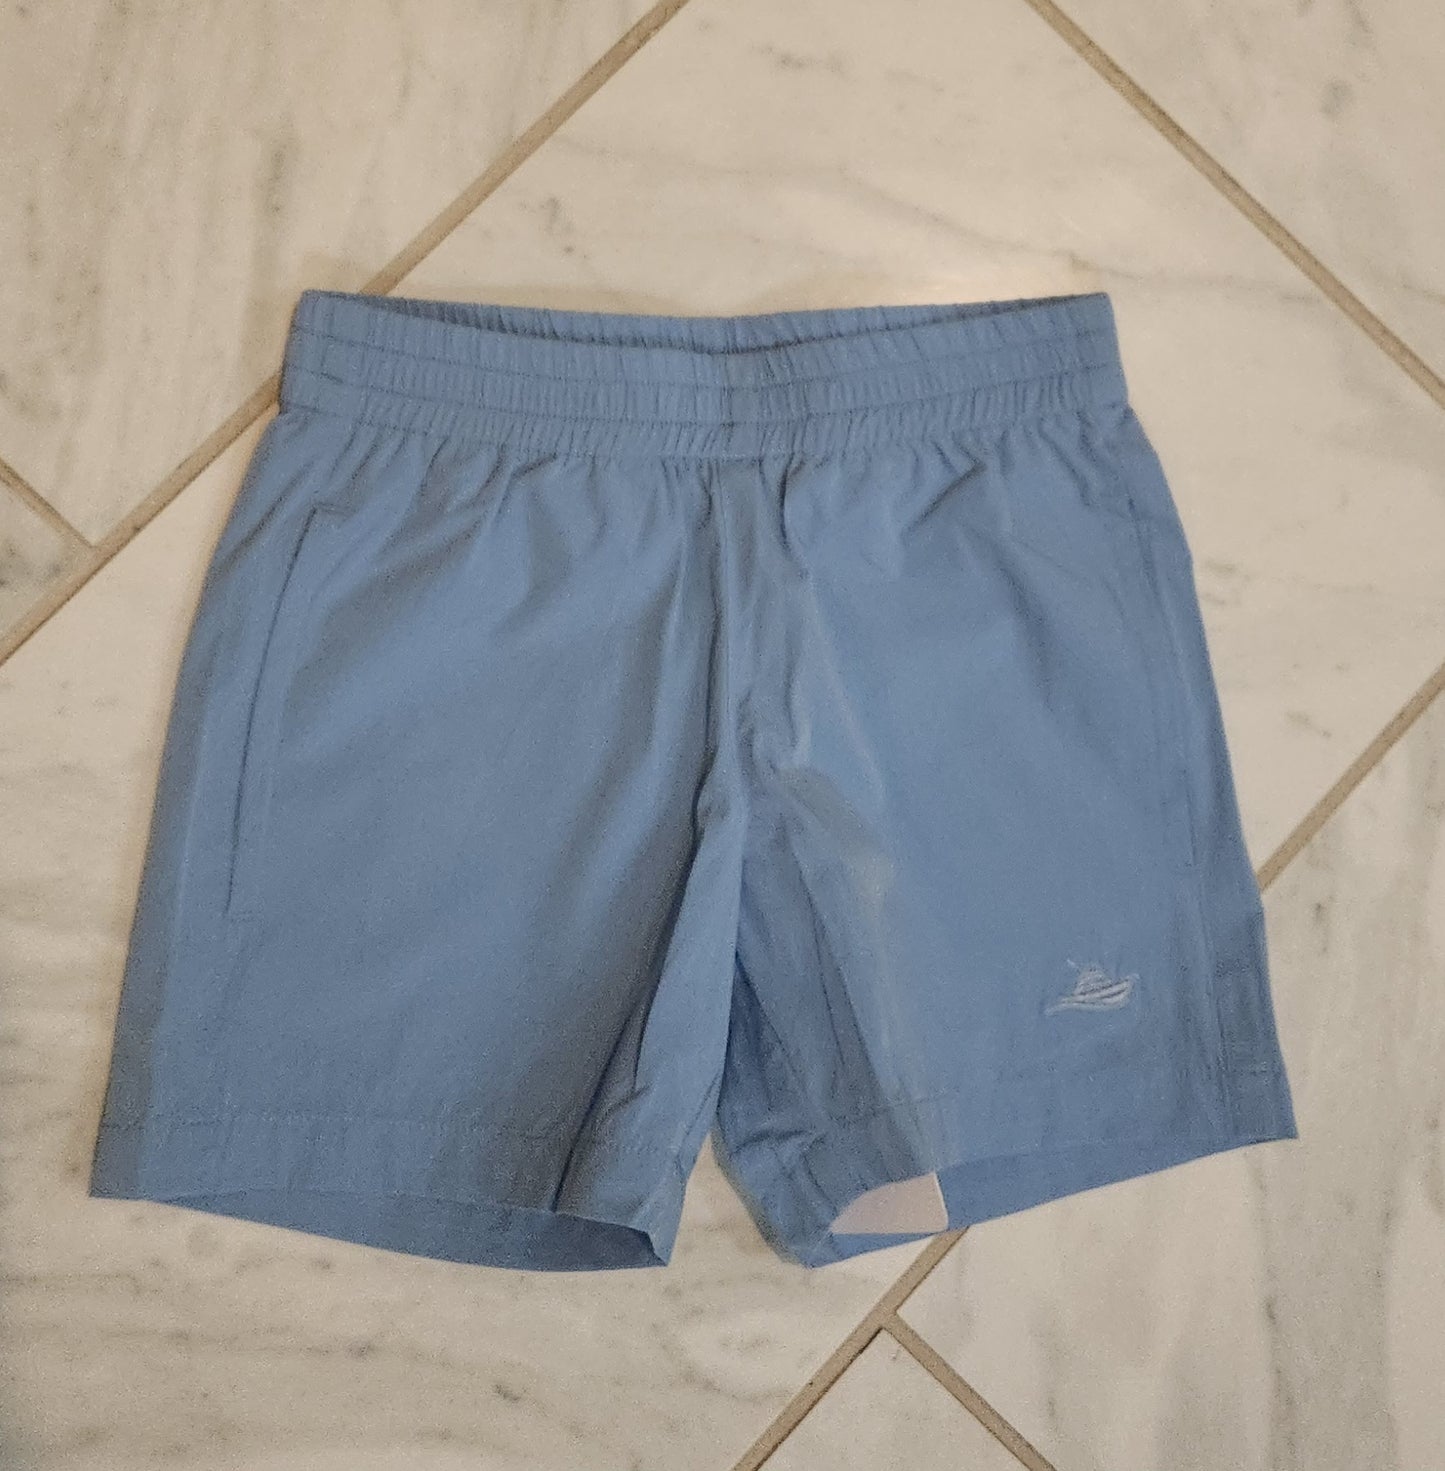 Southbound Performance Play Shorts-Ocean Blue